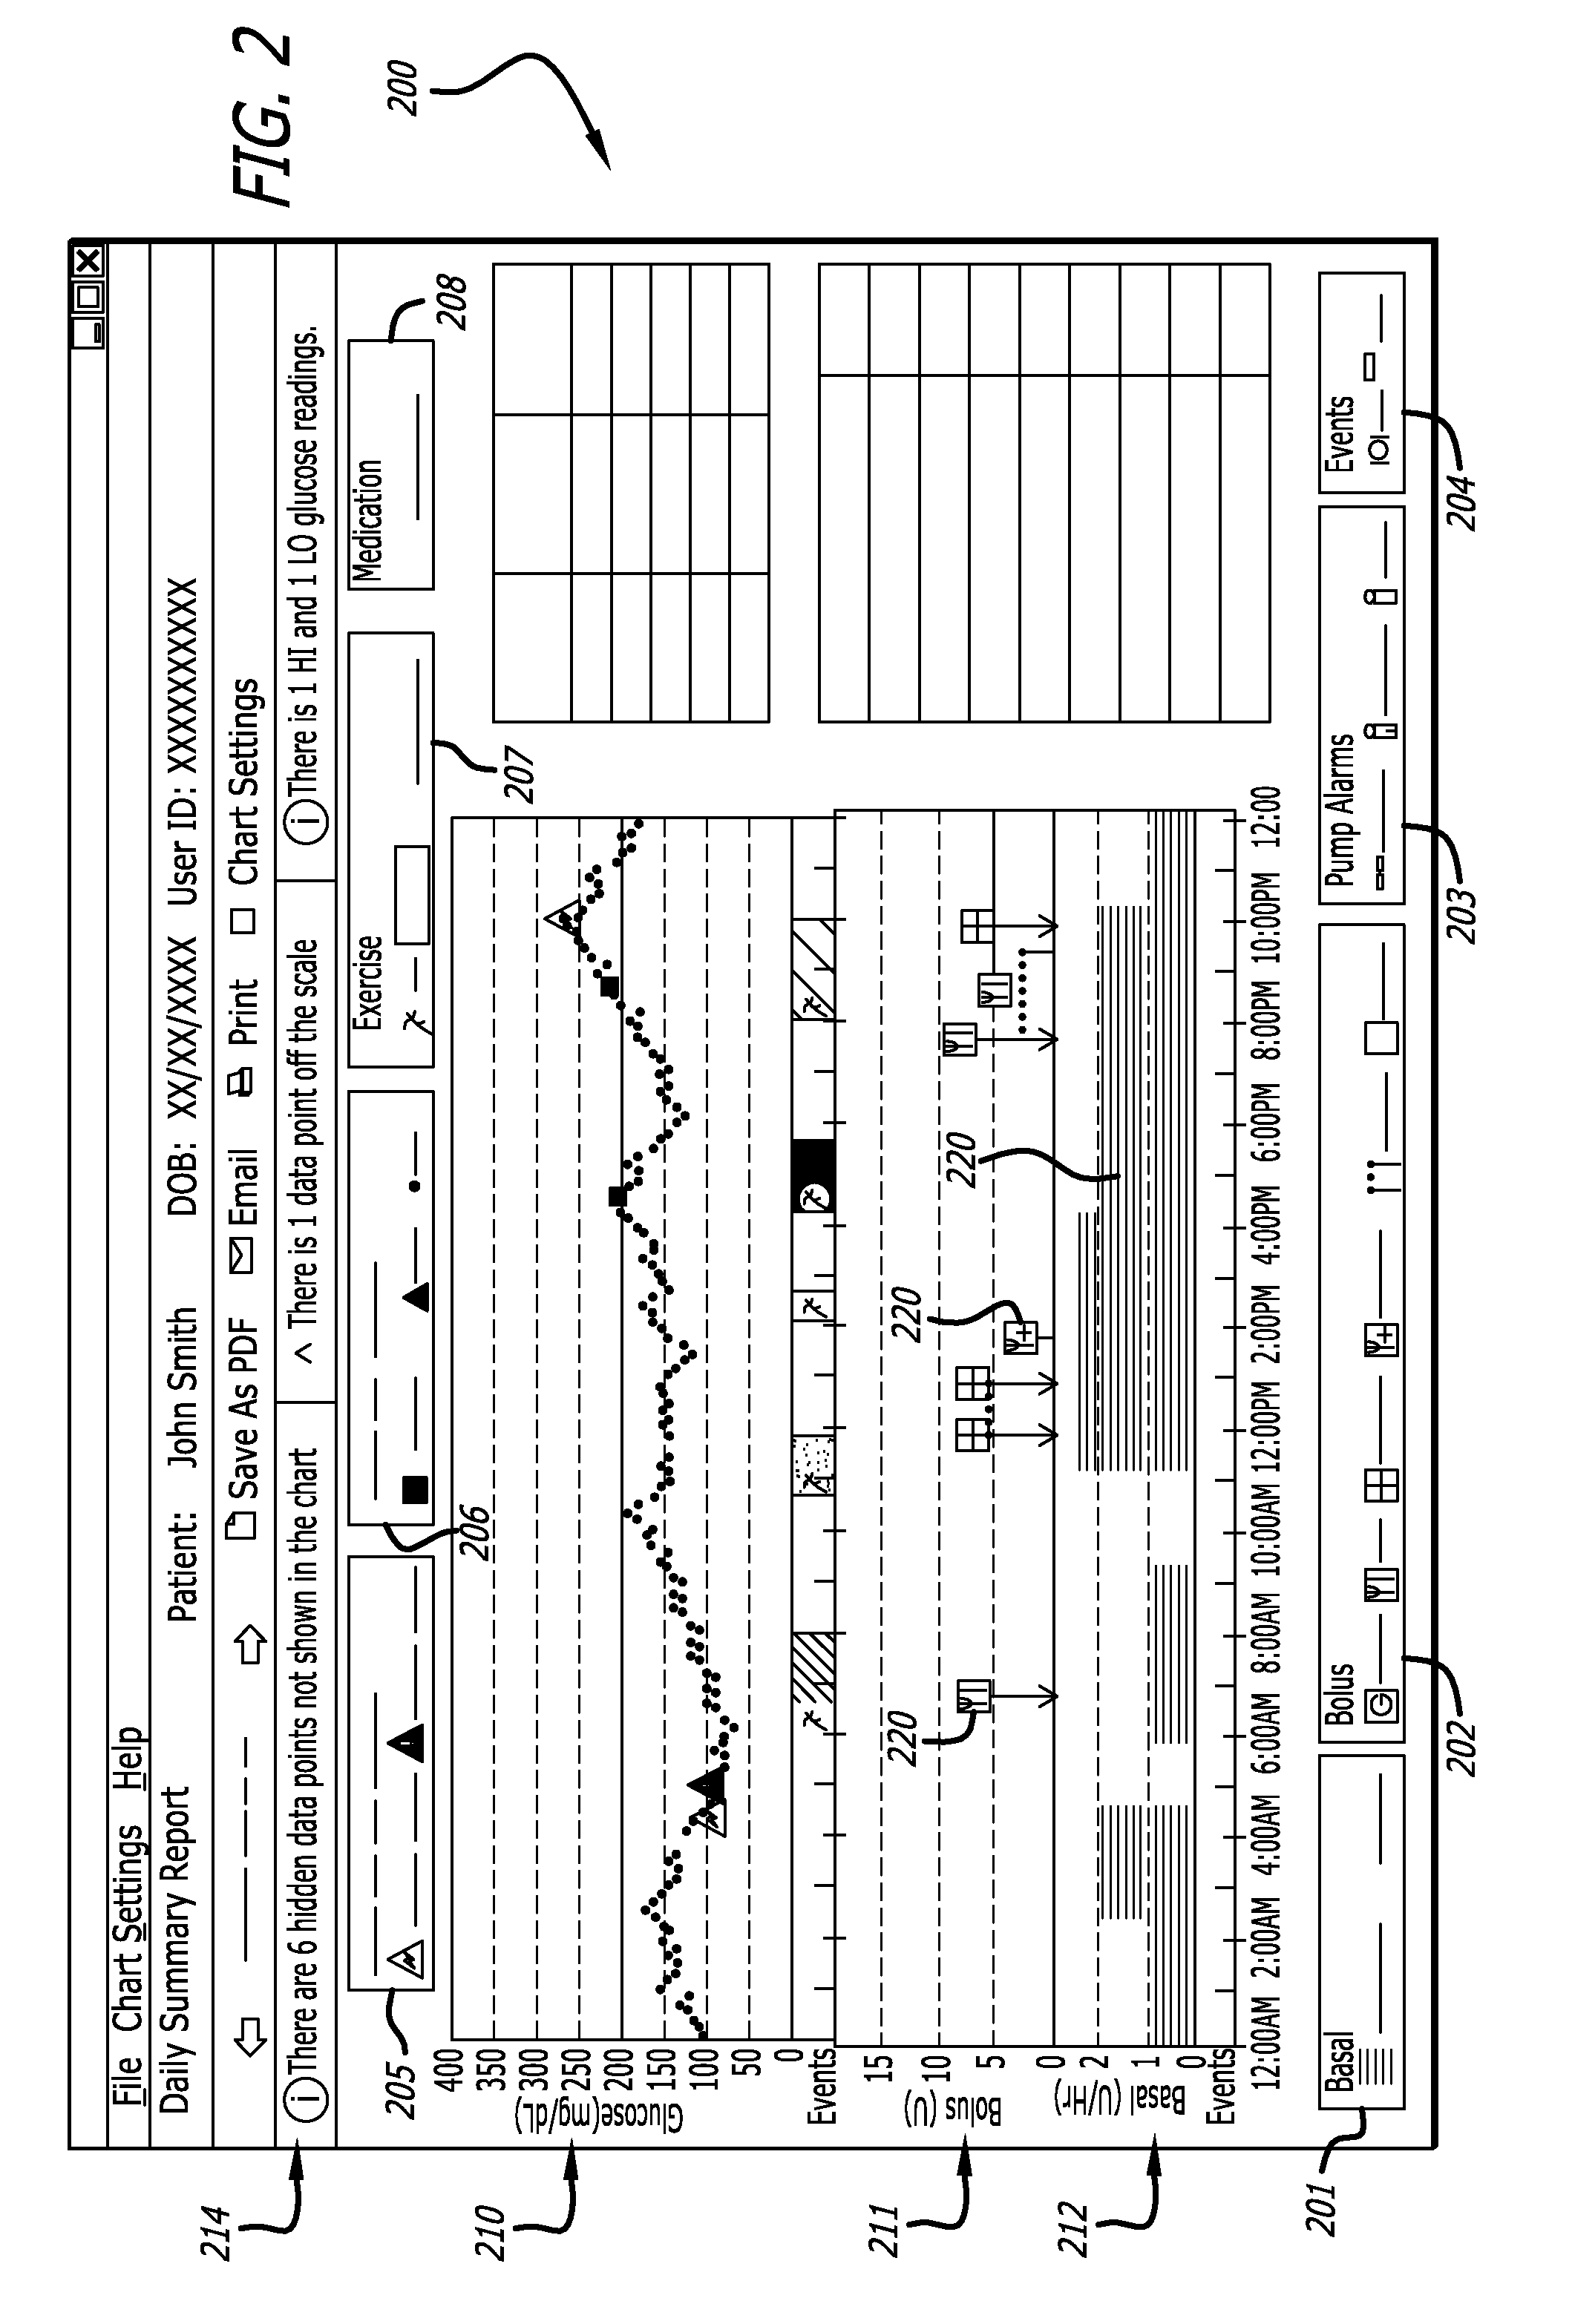 Integrated report generation of medical data with varying levels of information